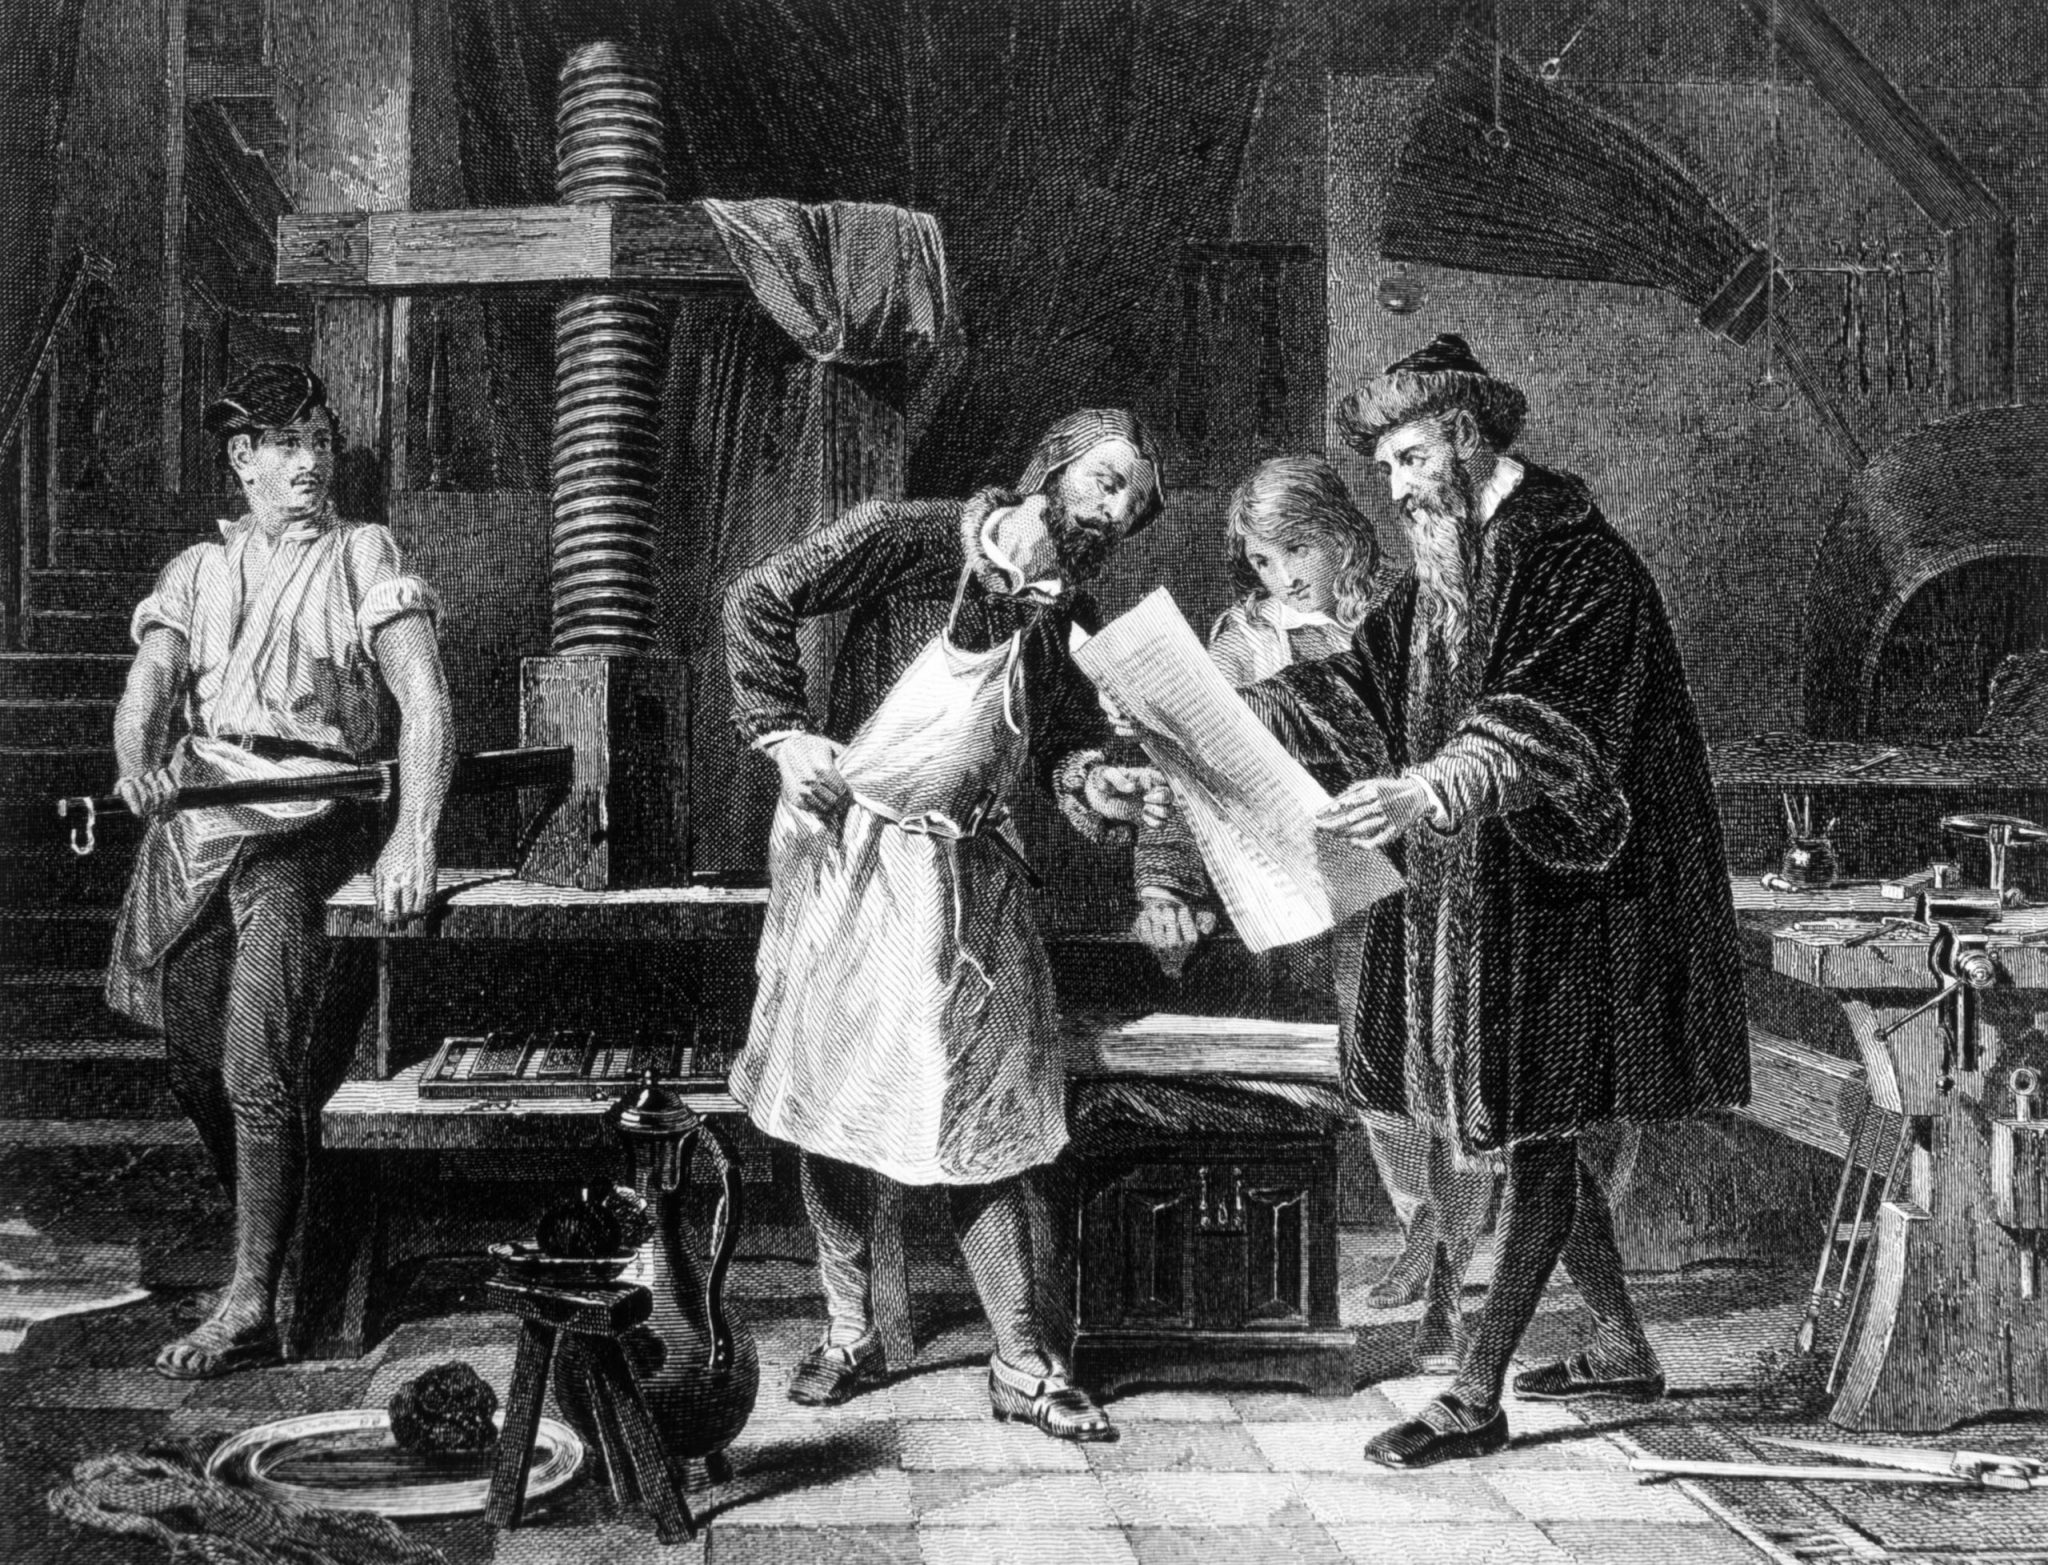 How the failure to adopt the Printing Press gave Europeans a 300